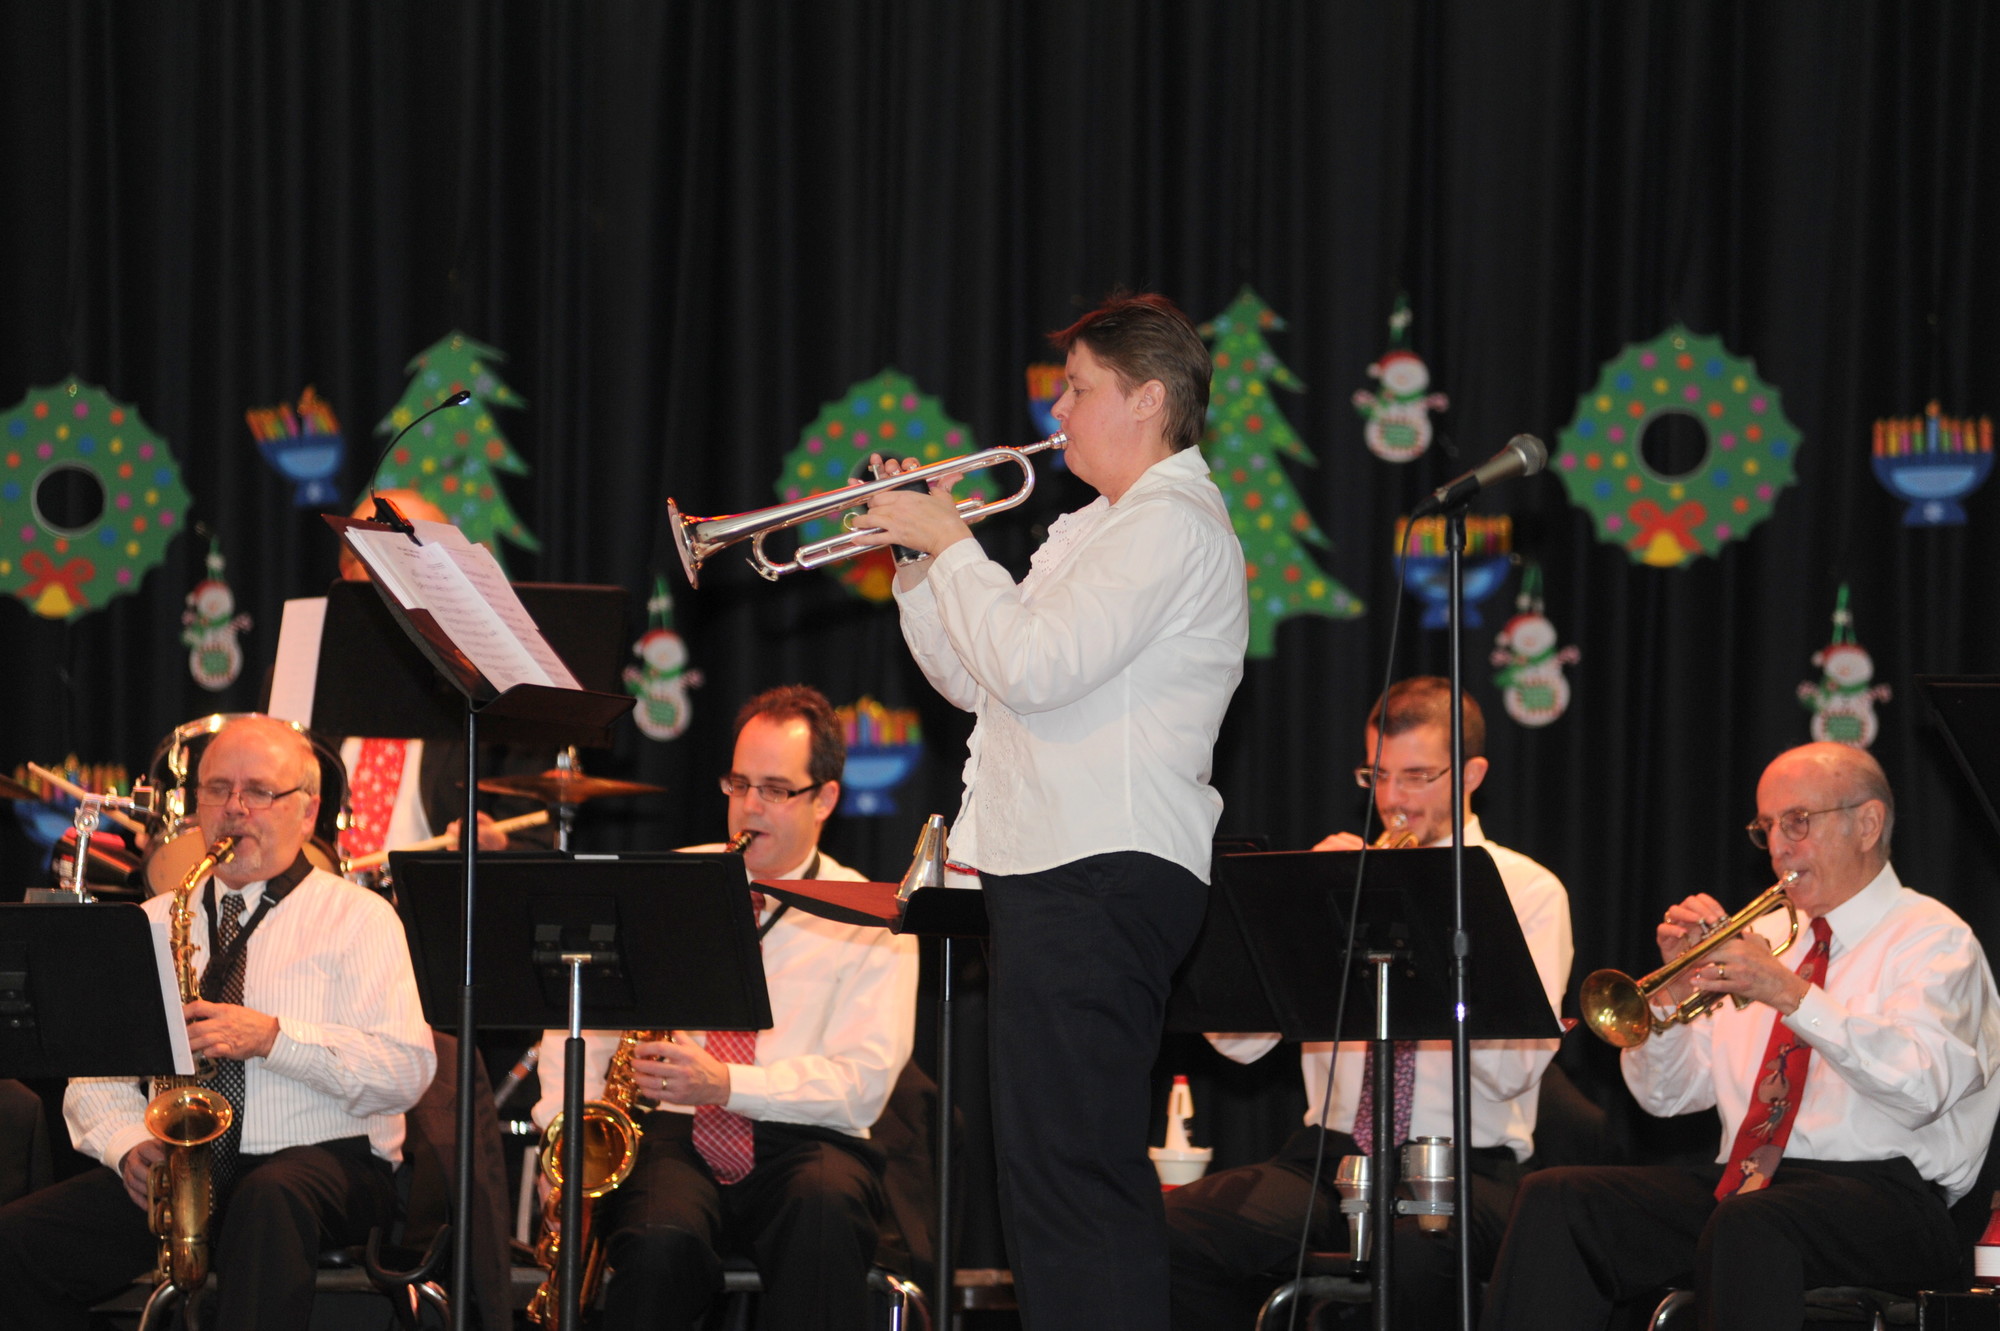 Karen Lisk, the leader of the Seaford Jazz Band, performed during the annual holiday concert last Saturday night in the Seaford High School auditorium.